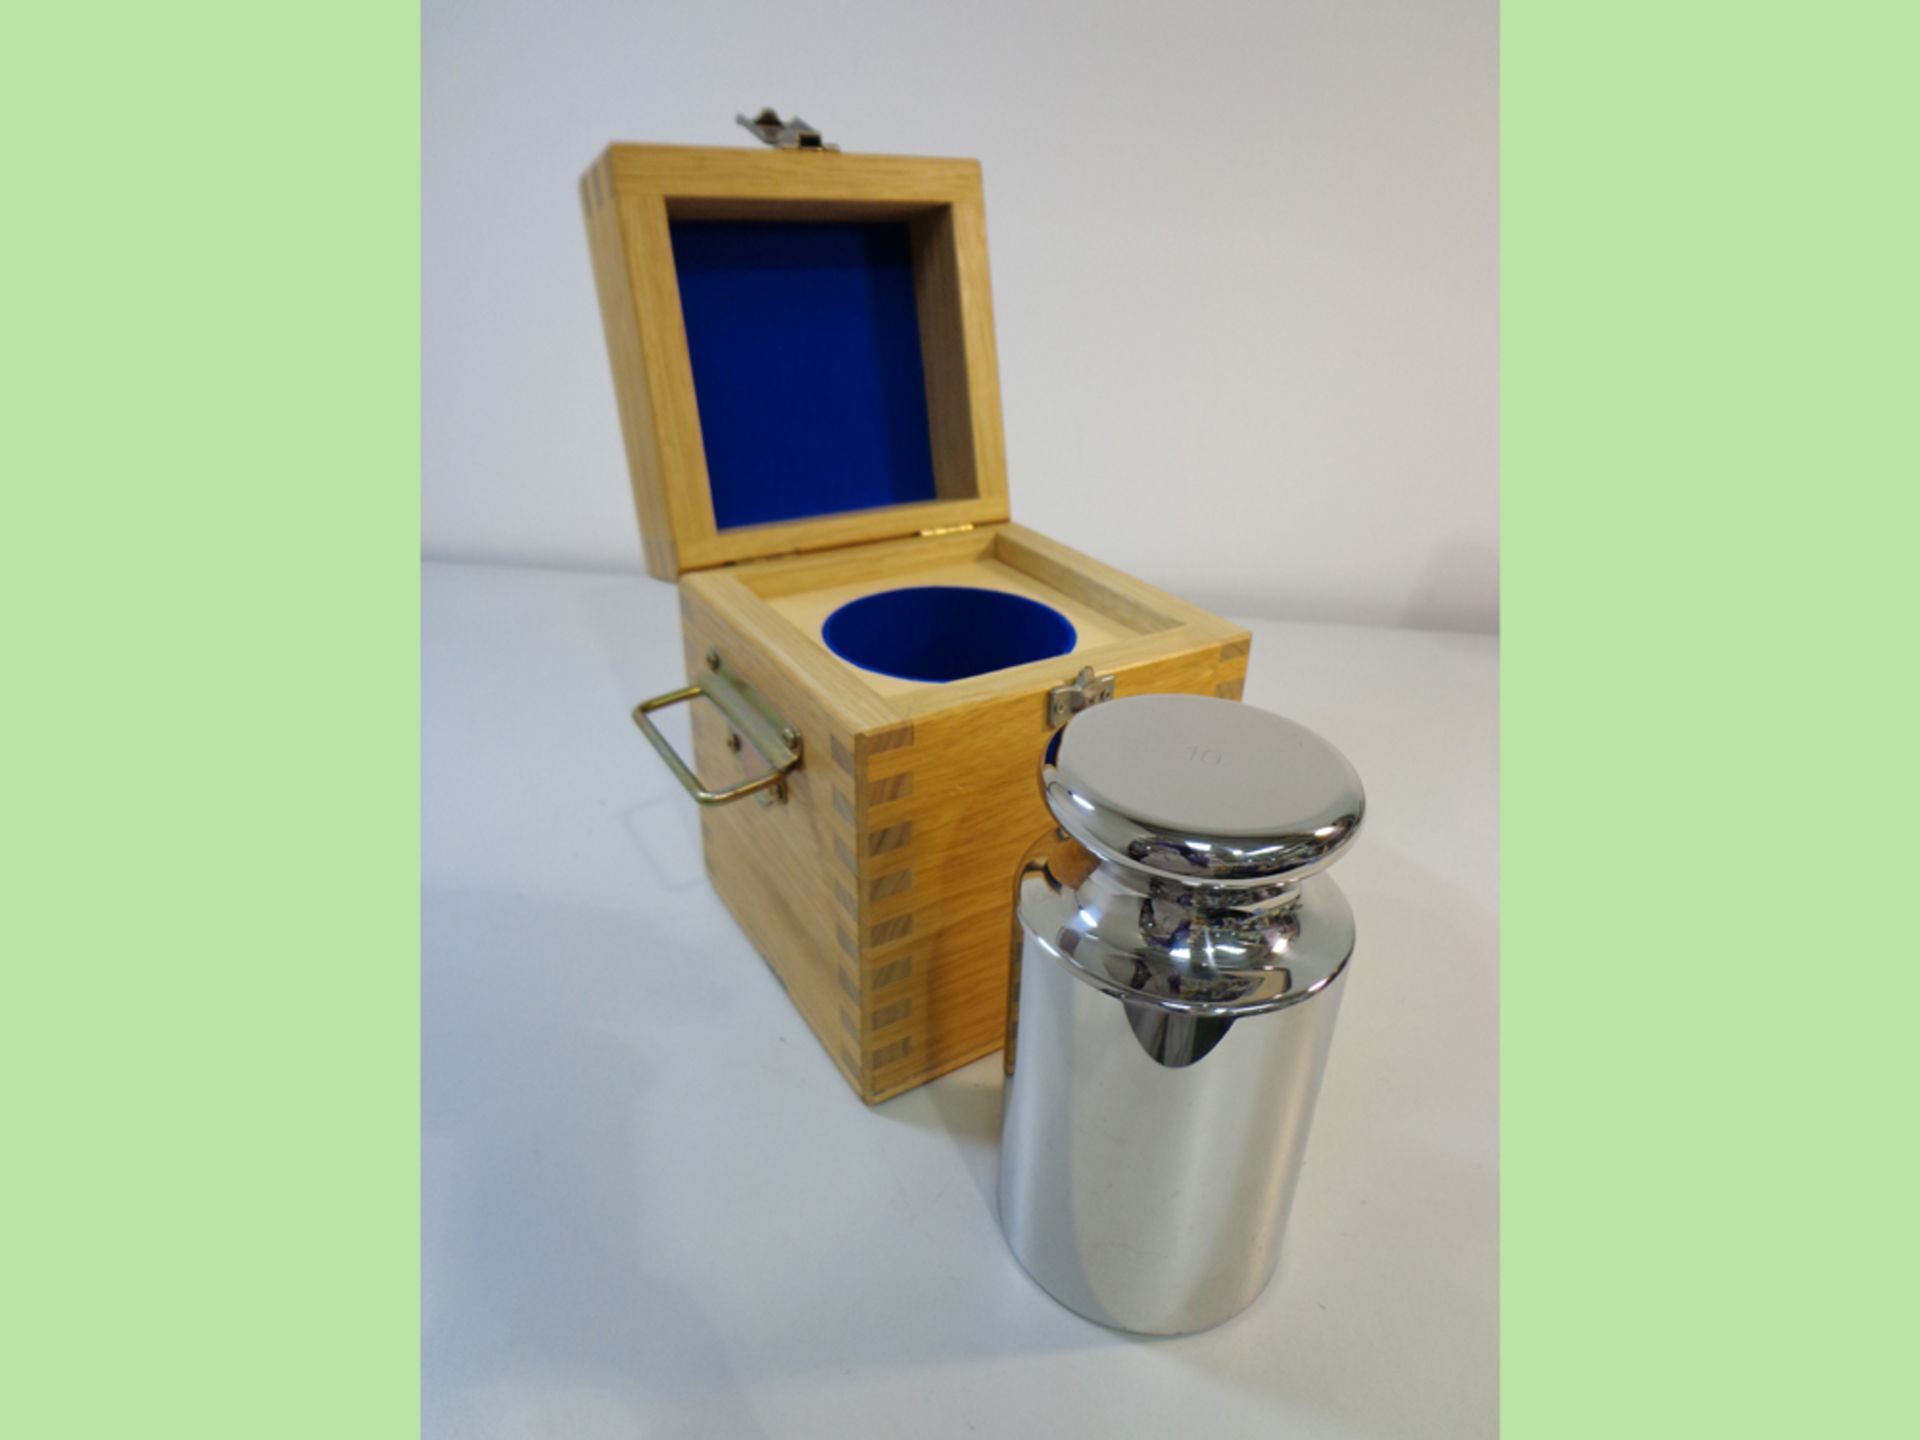 Mettler Toledo Single 10kg F1 Stainless Steel Calibration Weight in Wooden Box, Ref 15872